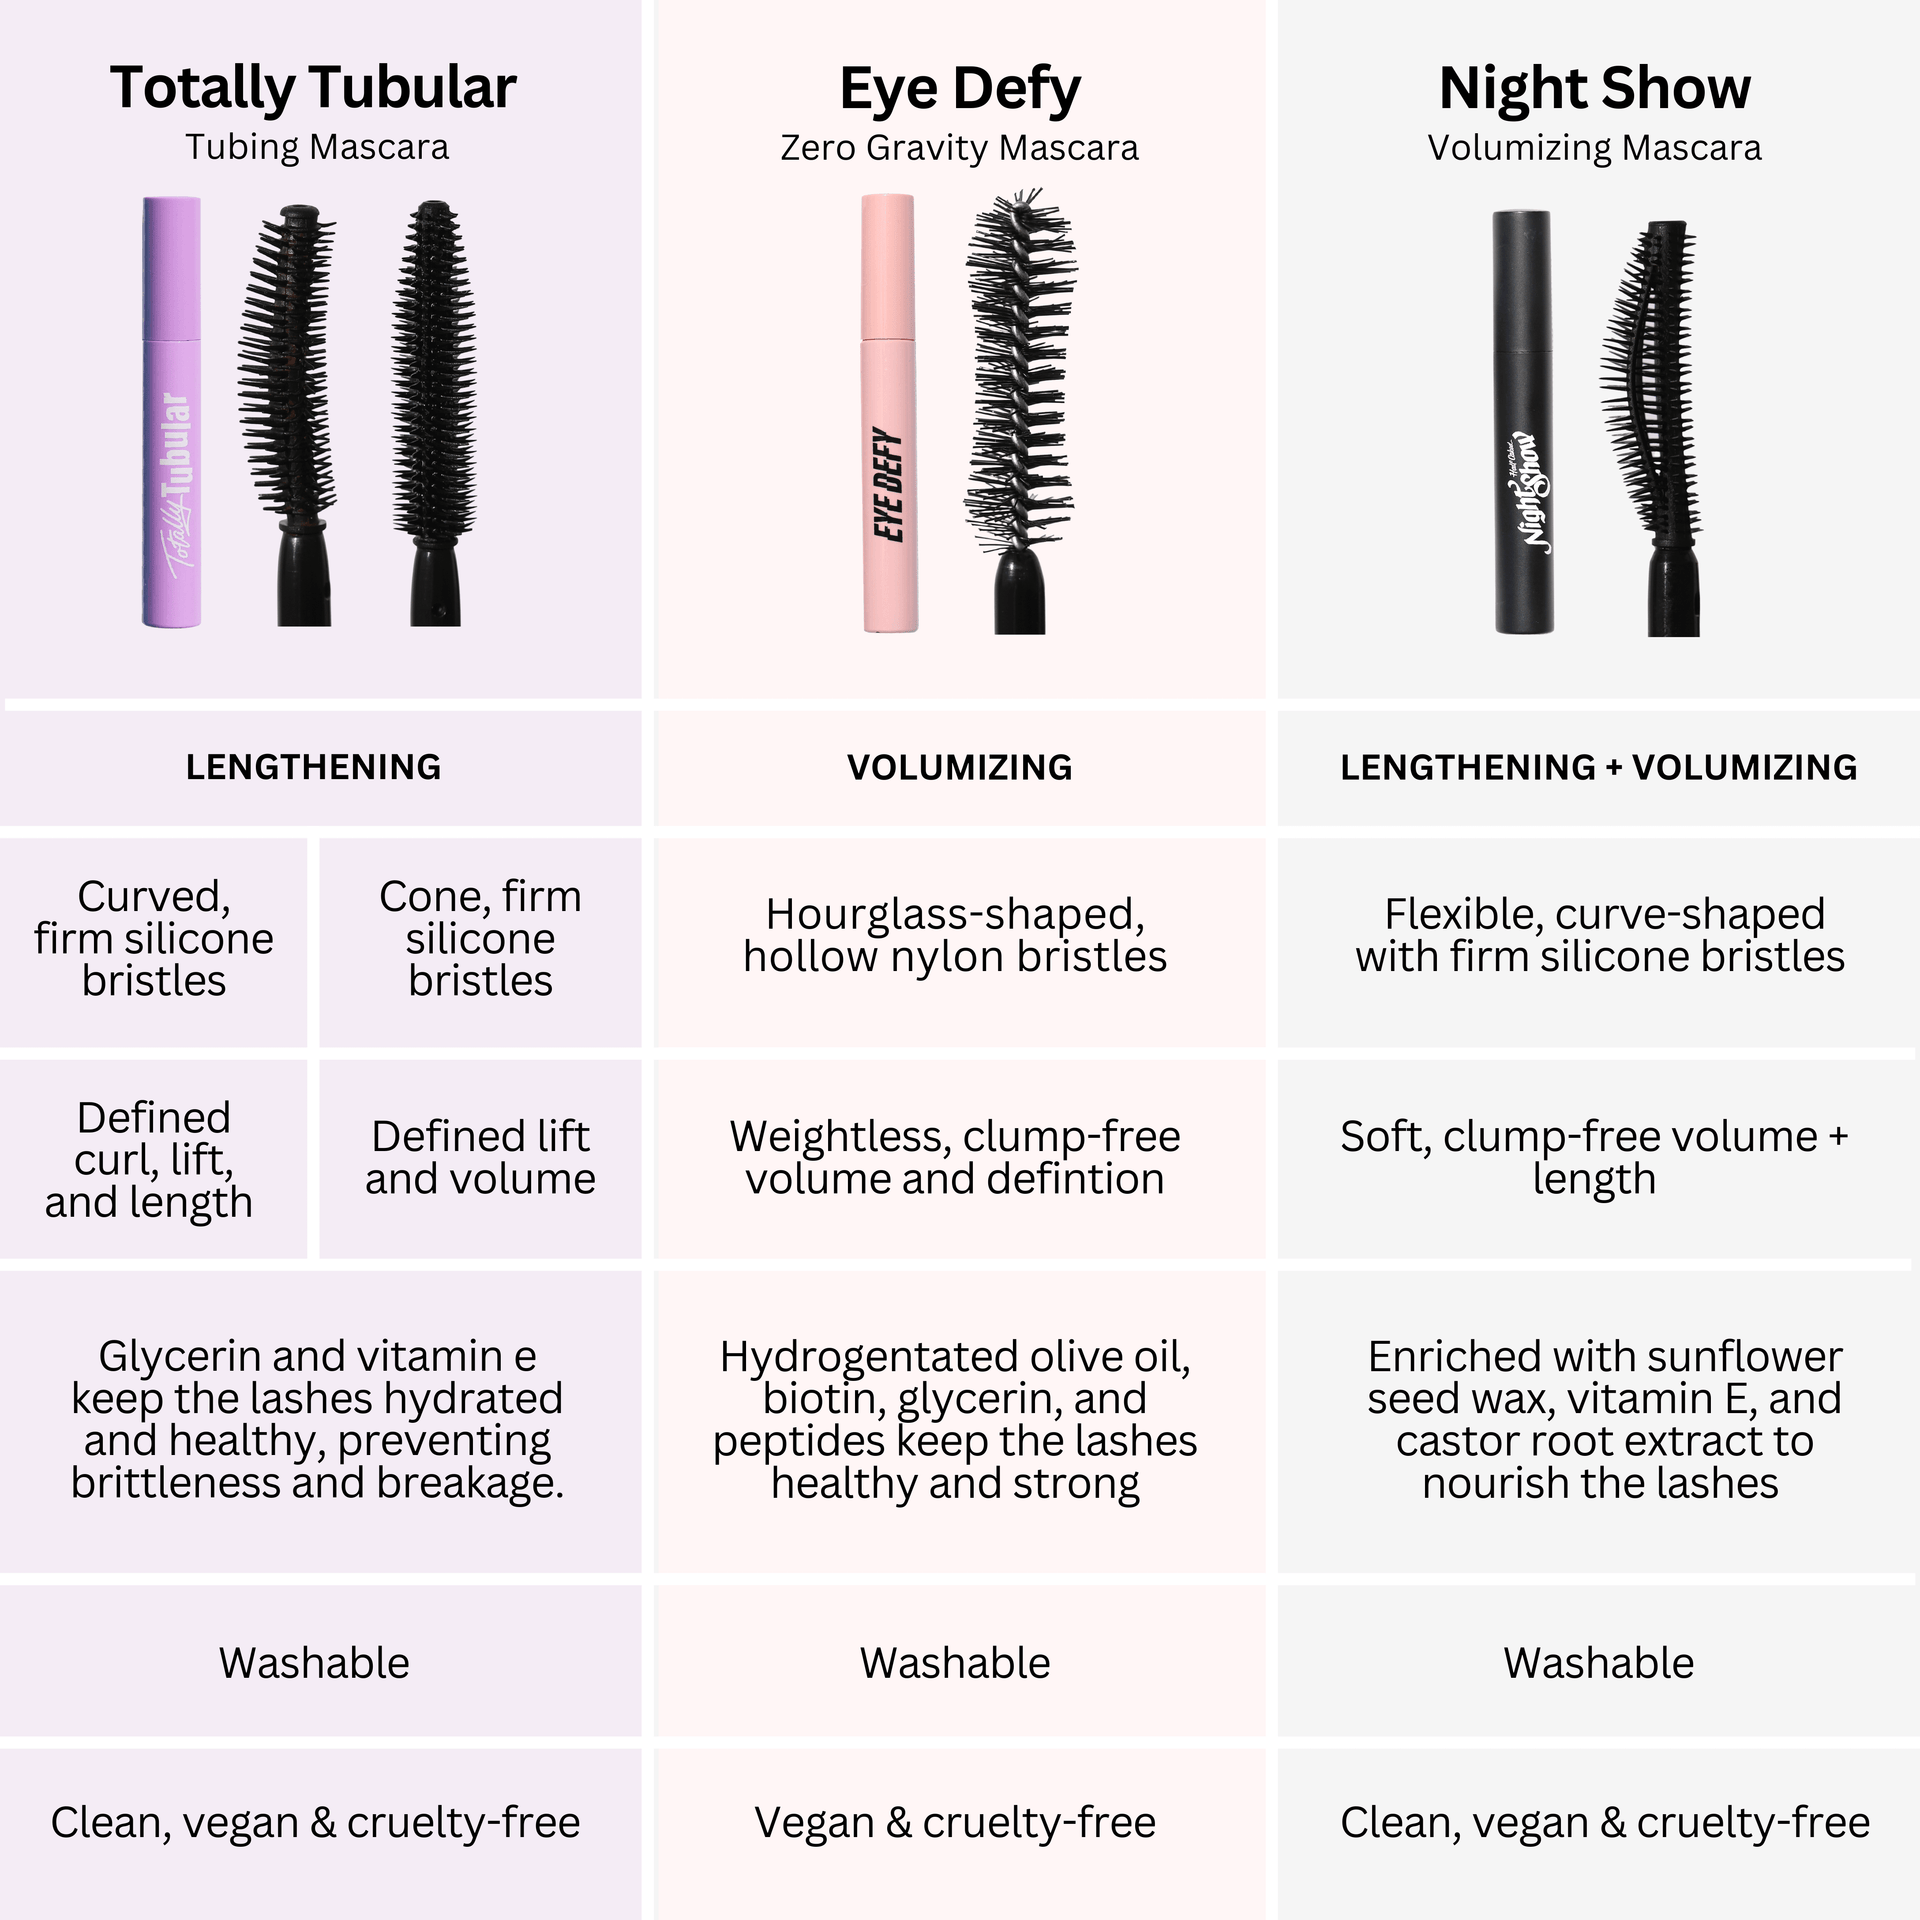 "Comparison chart of three mascaras: Totally Tubular, Eye Defy, and Night Show Volumizing Mascara, highlighting their features like bristle types, benefits, ingredients, and attributes such as clean, vegan, and cruelty-free."